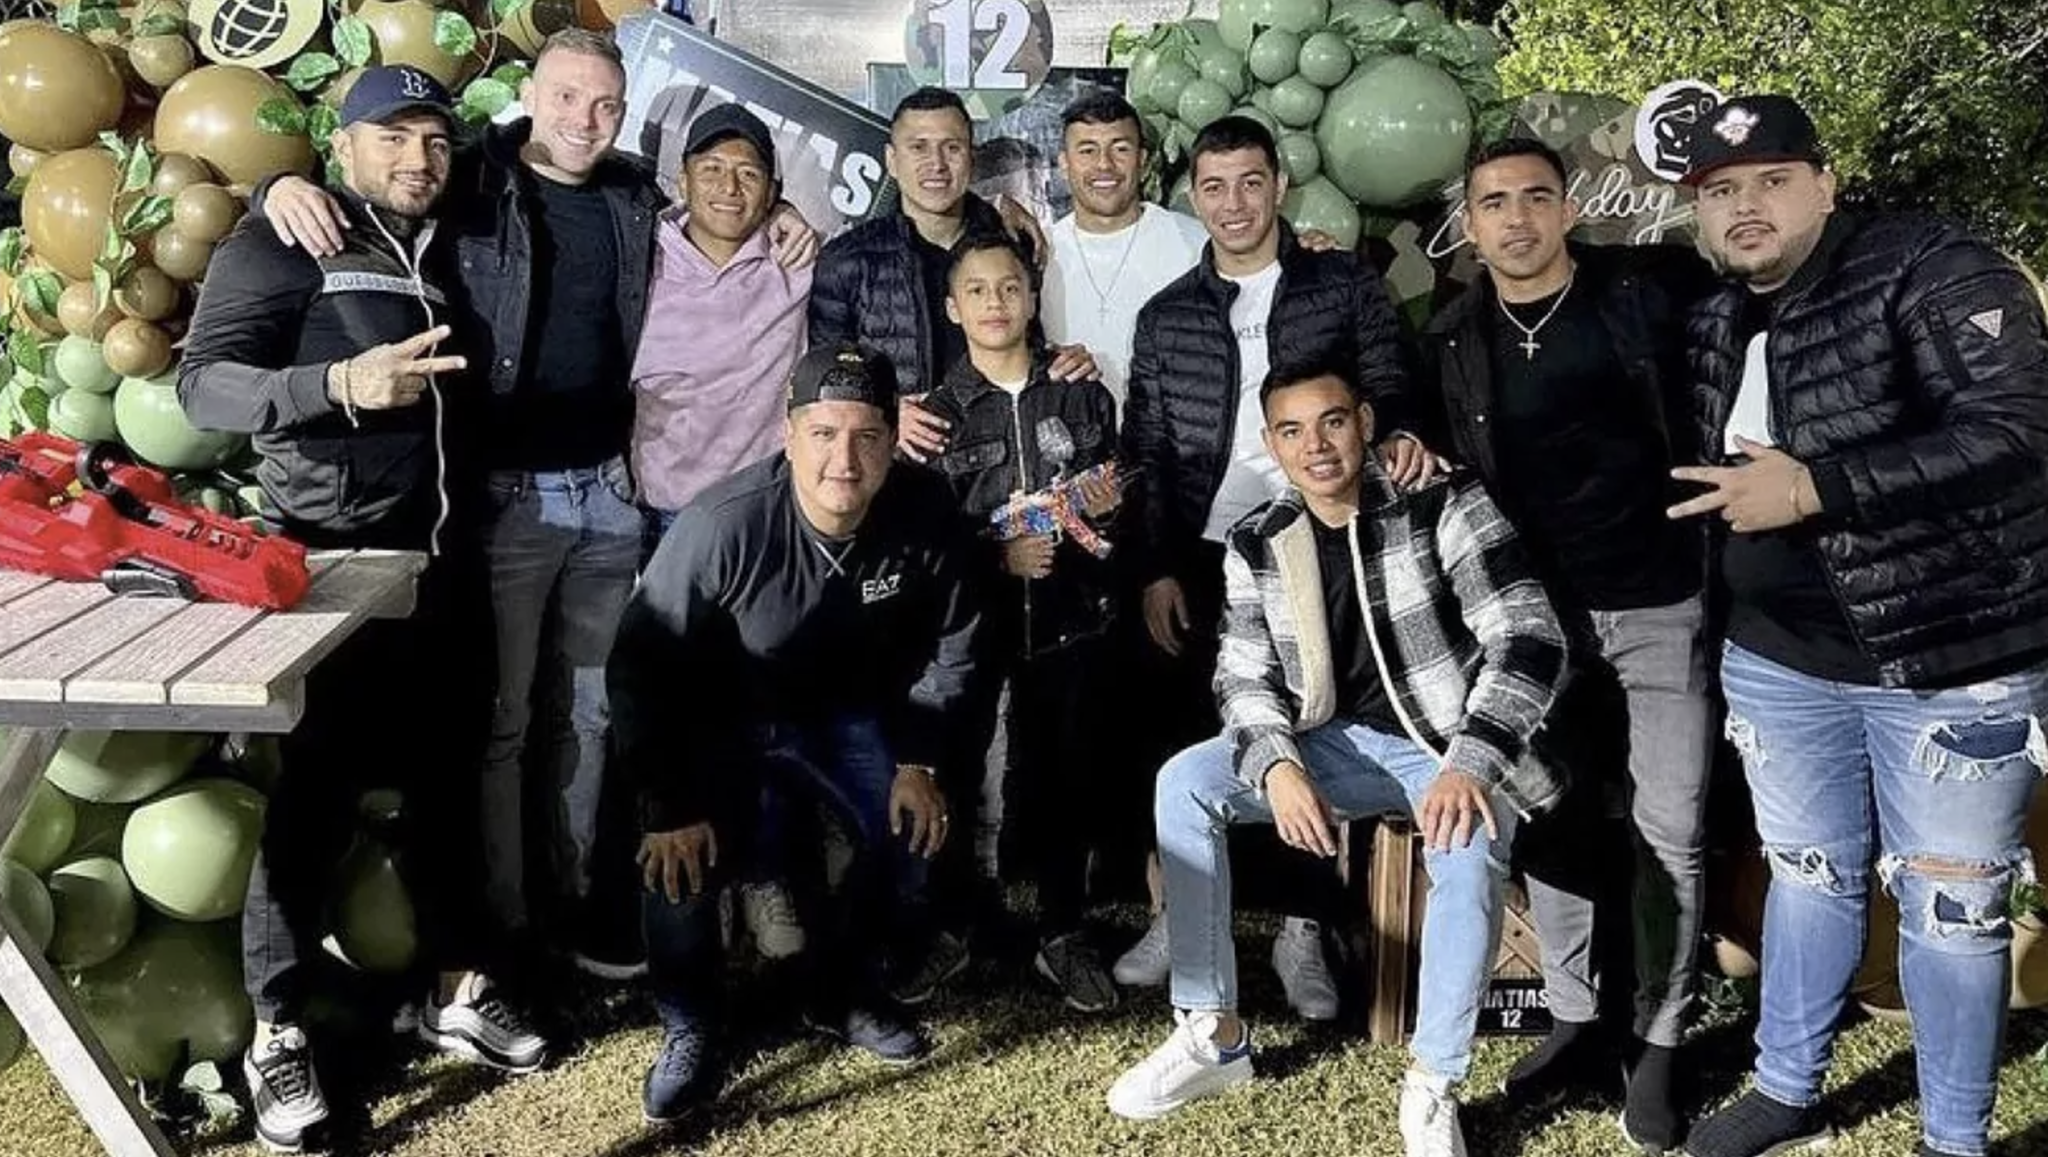 Cruz Azul players attend the Cata Domínguez party